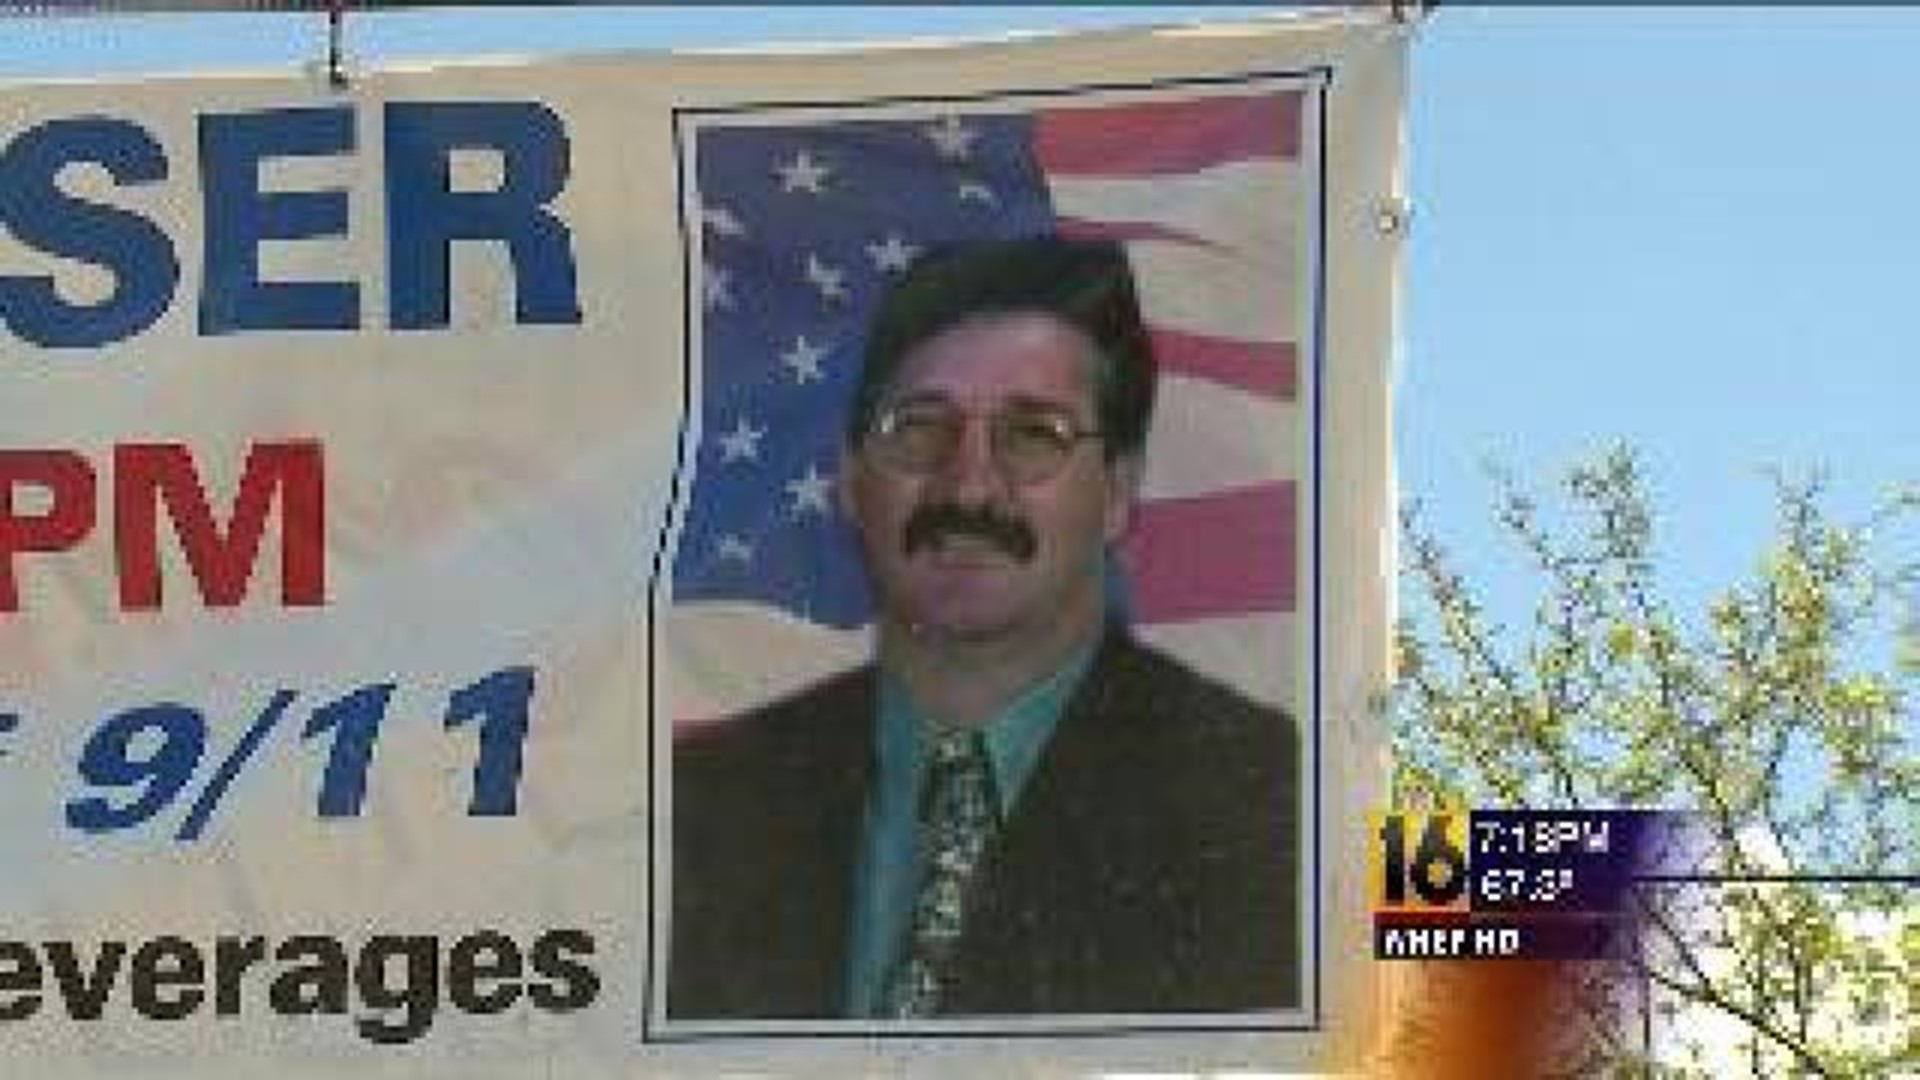 9/11 Victim To Be Remembered In North Scranton